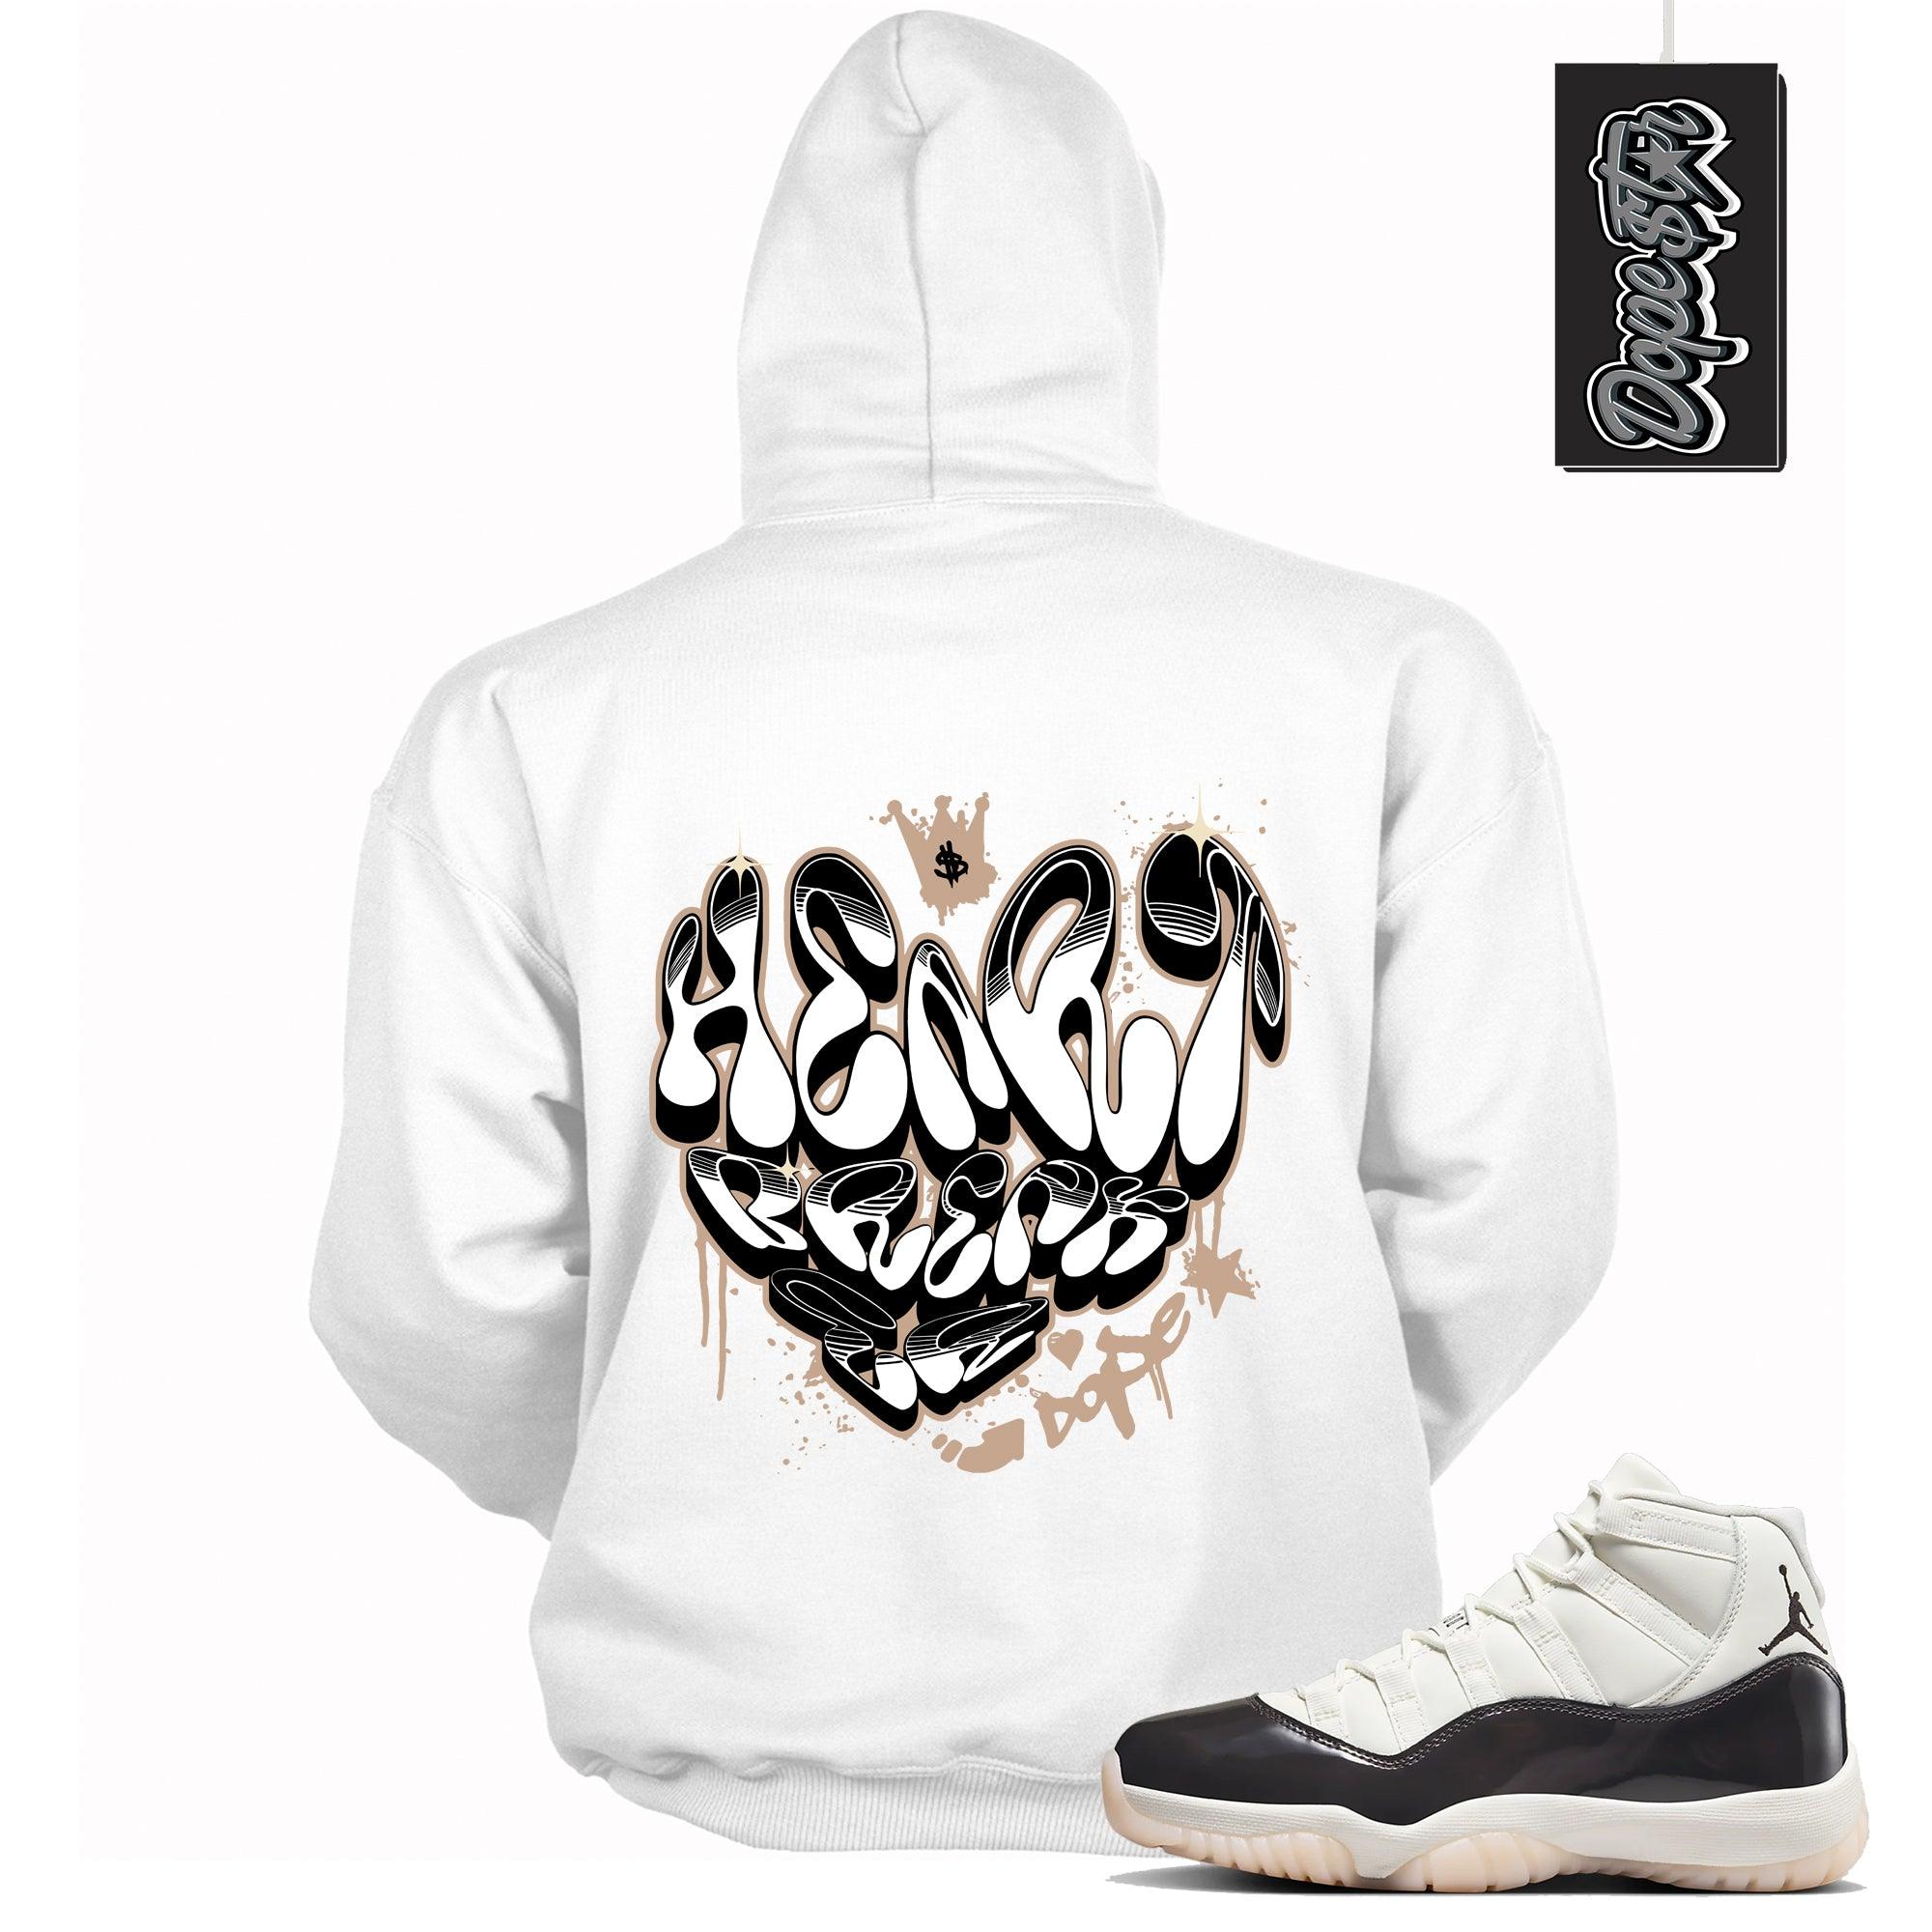 Cool White Graphic Hoodie with “ Heart Breaker “ print, that perfectly matches Air Jordan 11 Neapolitan sneakers